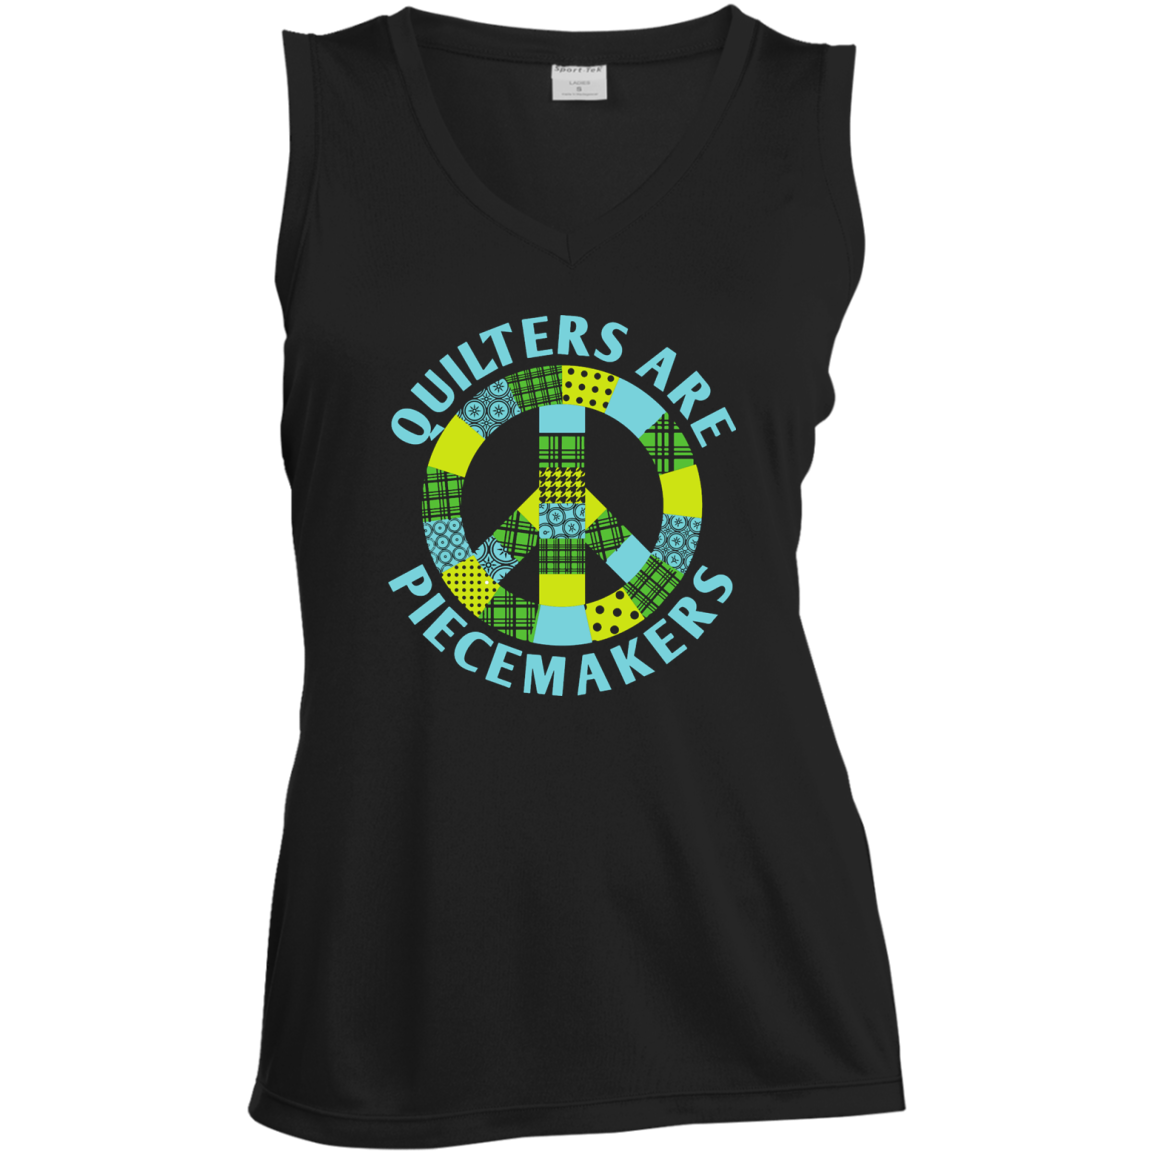 Quilters are Piecemakers Ladies Sleeveless V-Neck - Crafter4Life - 3